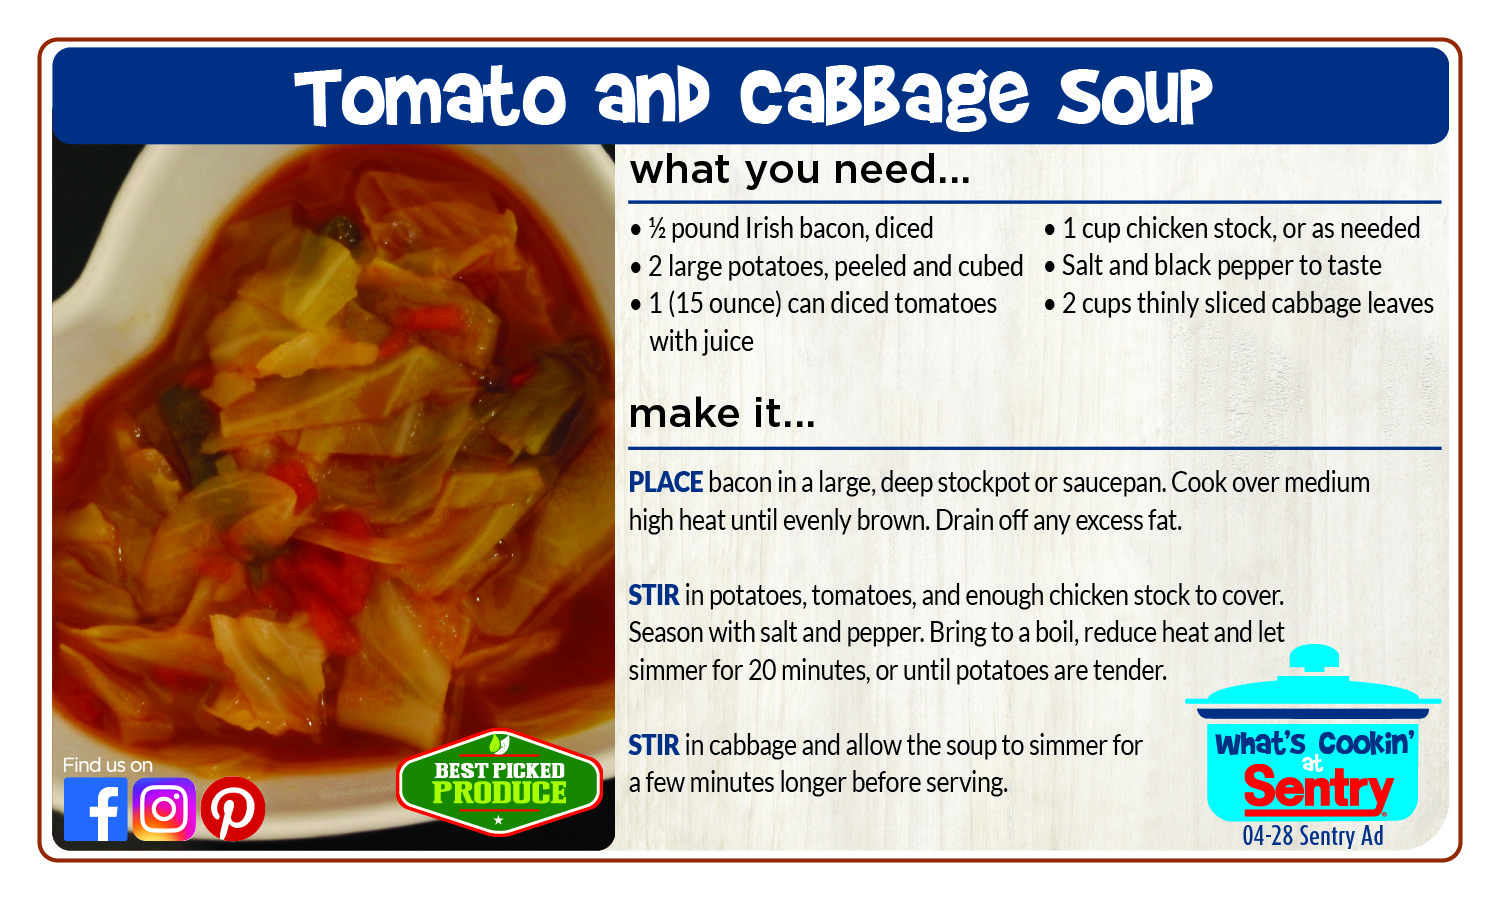 Recipe Card for Tomato and Cabbage Soup